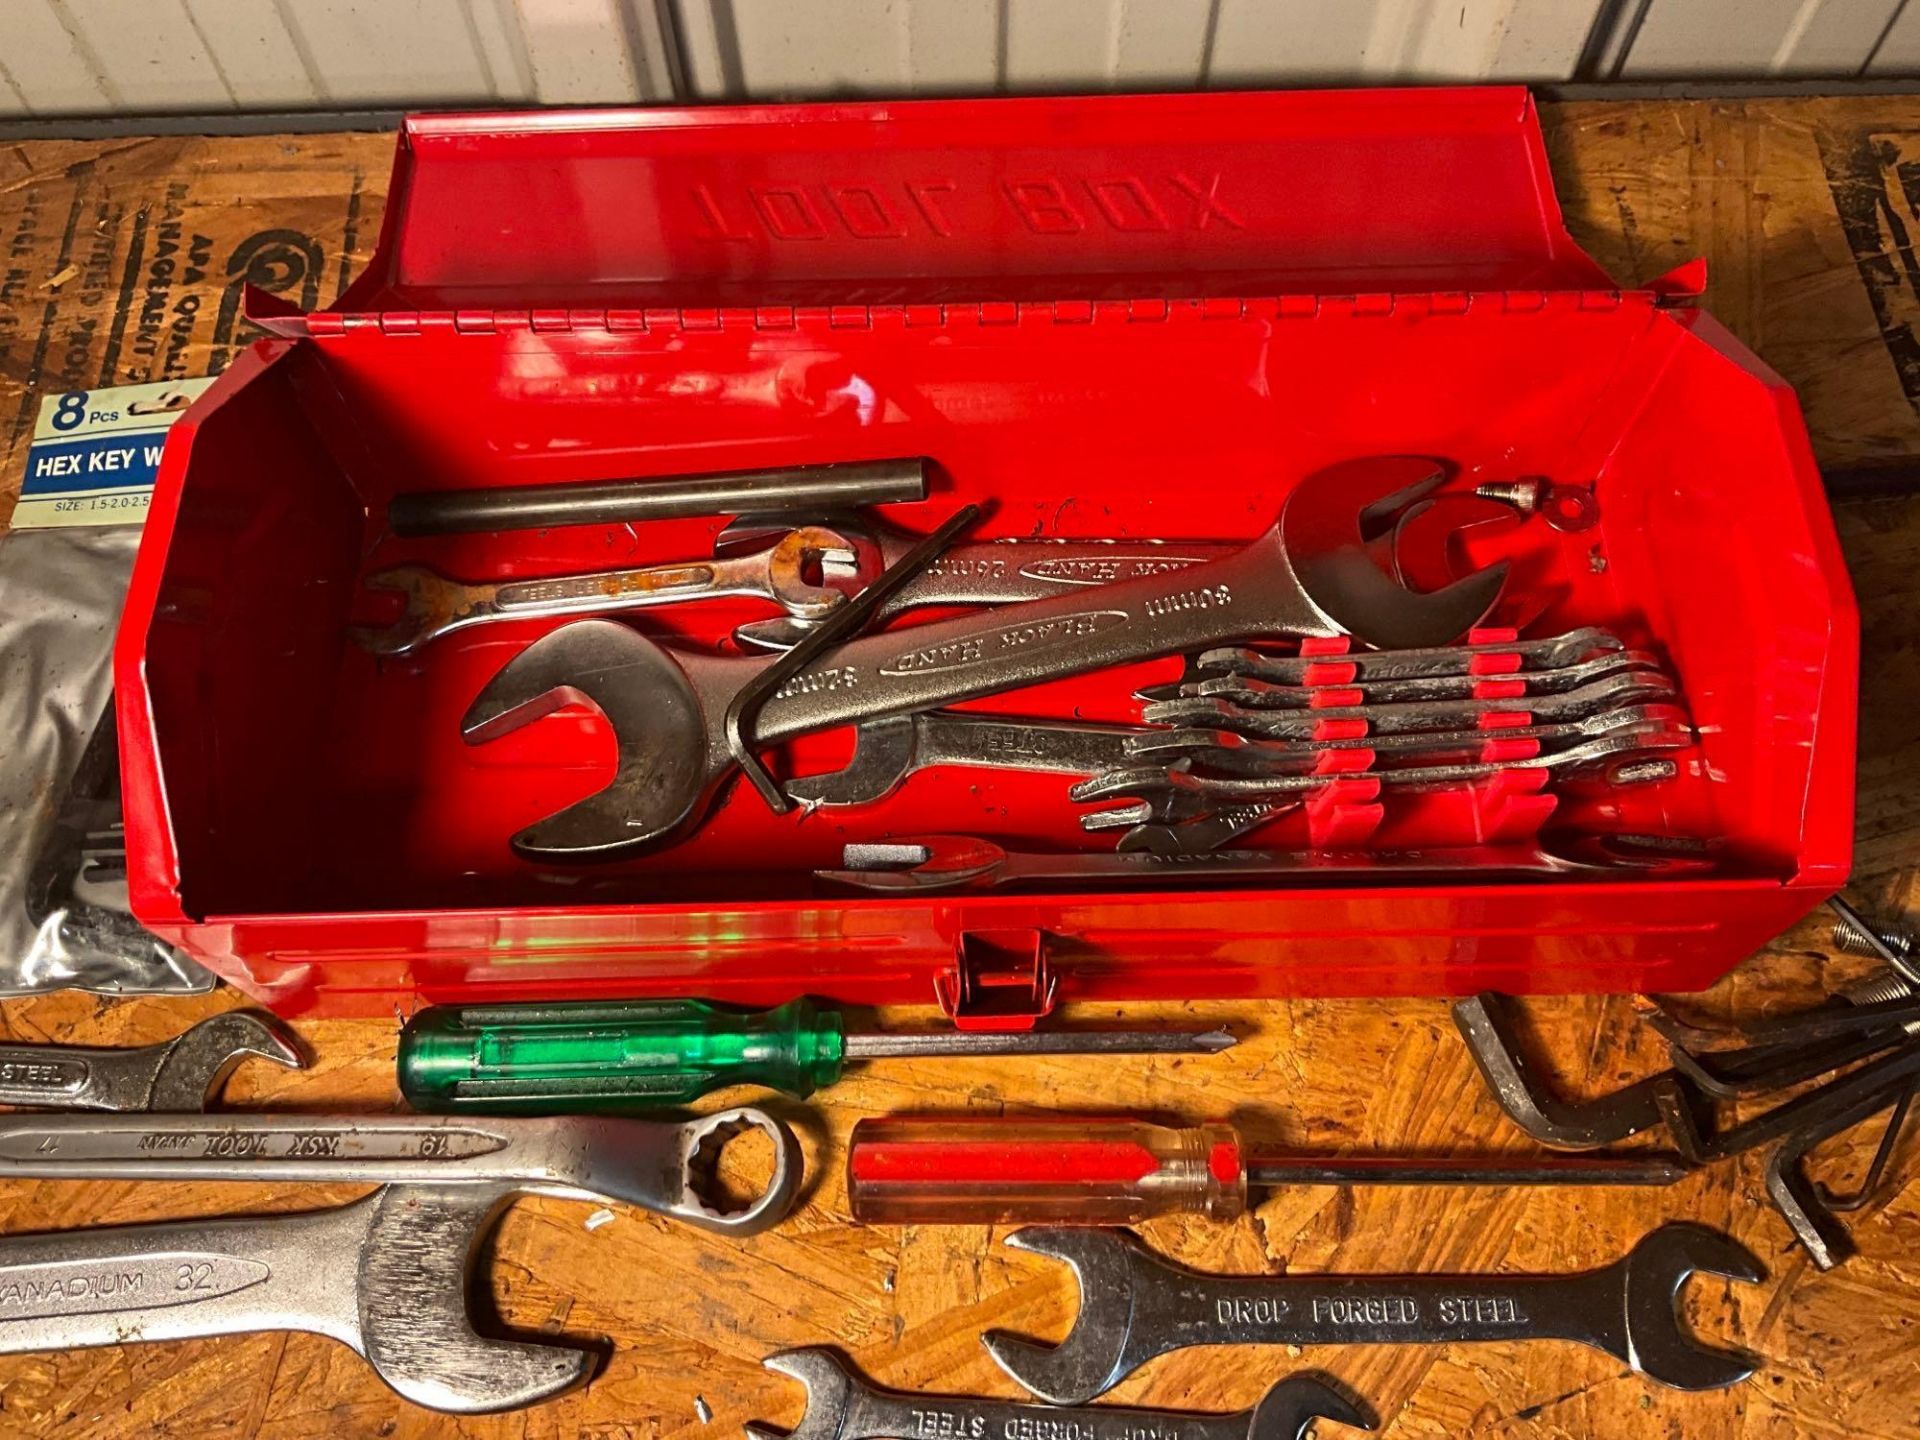 TOOLBOX WITH ASSORTED HAND TOOLS - Image 2 of 2